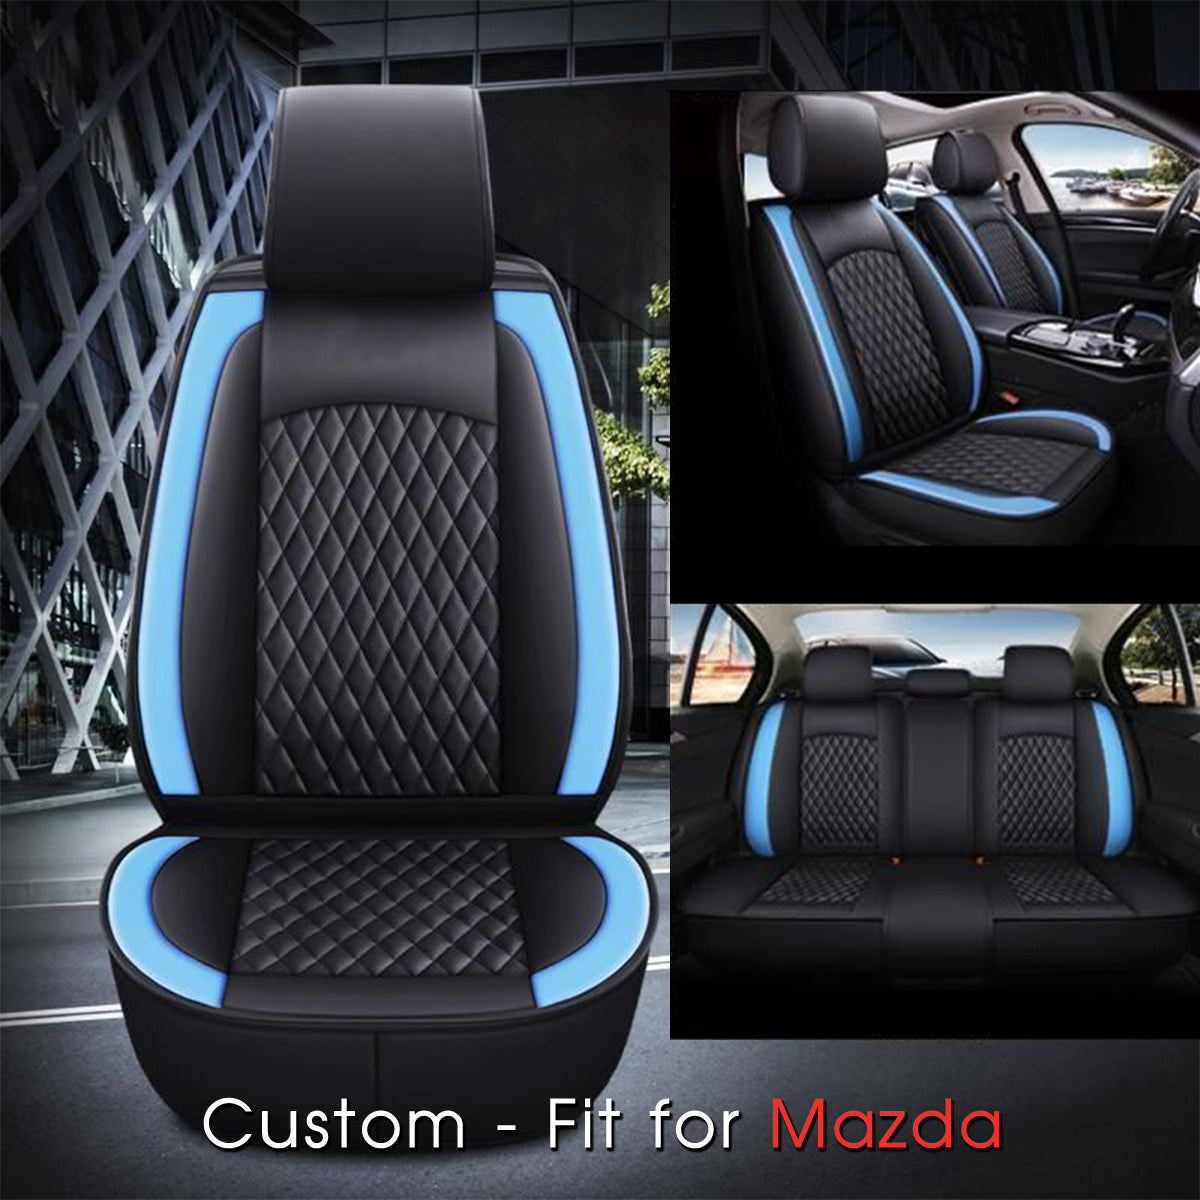 2 Car Seat Covers Full Set, Custom-Fit For Car, Waterproof Leather Front Rear Seat Automotive Protection Cushions, Car Accessories DLMA211